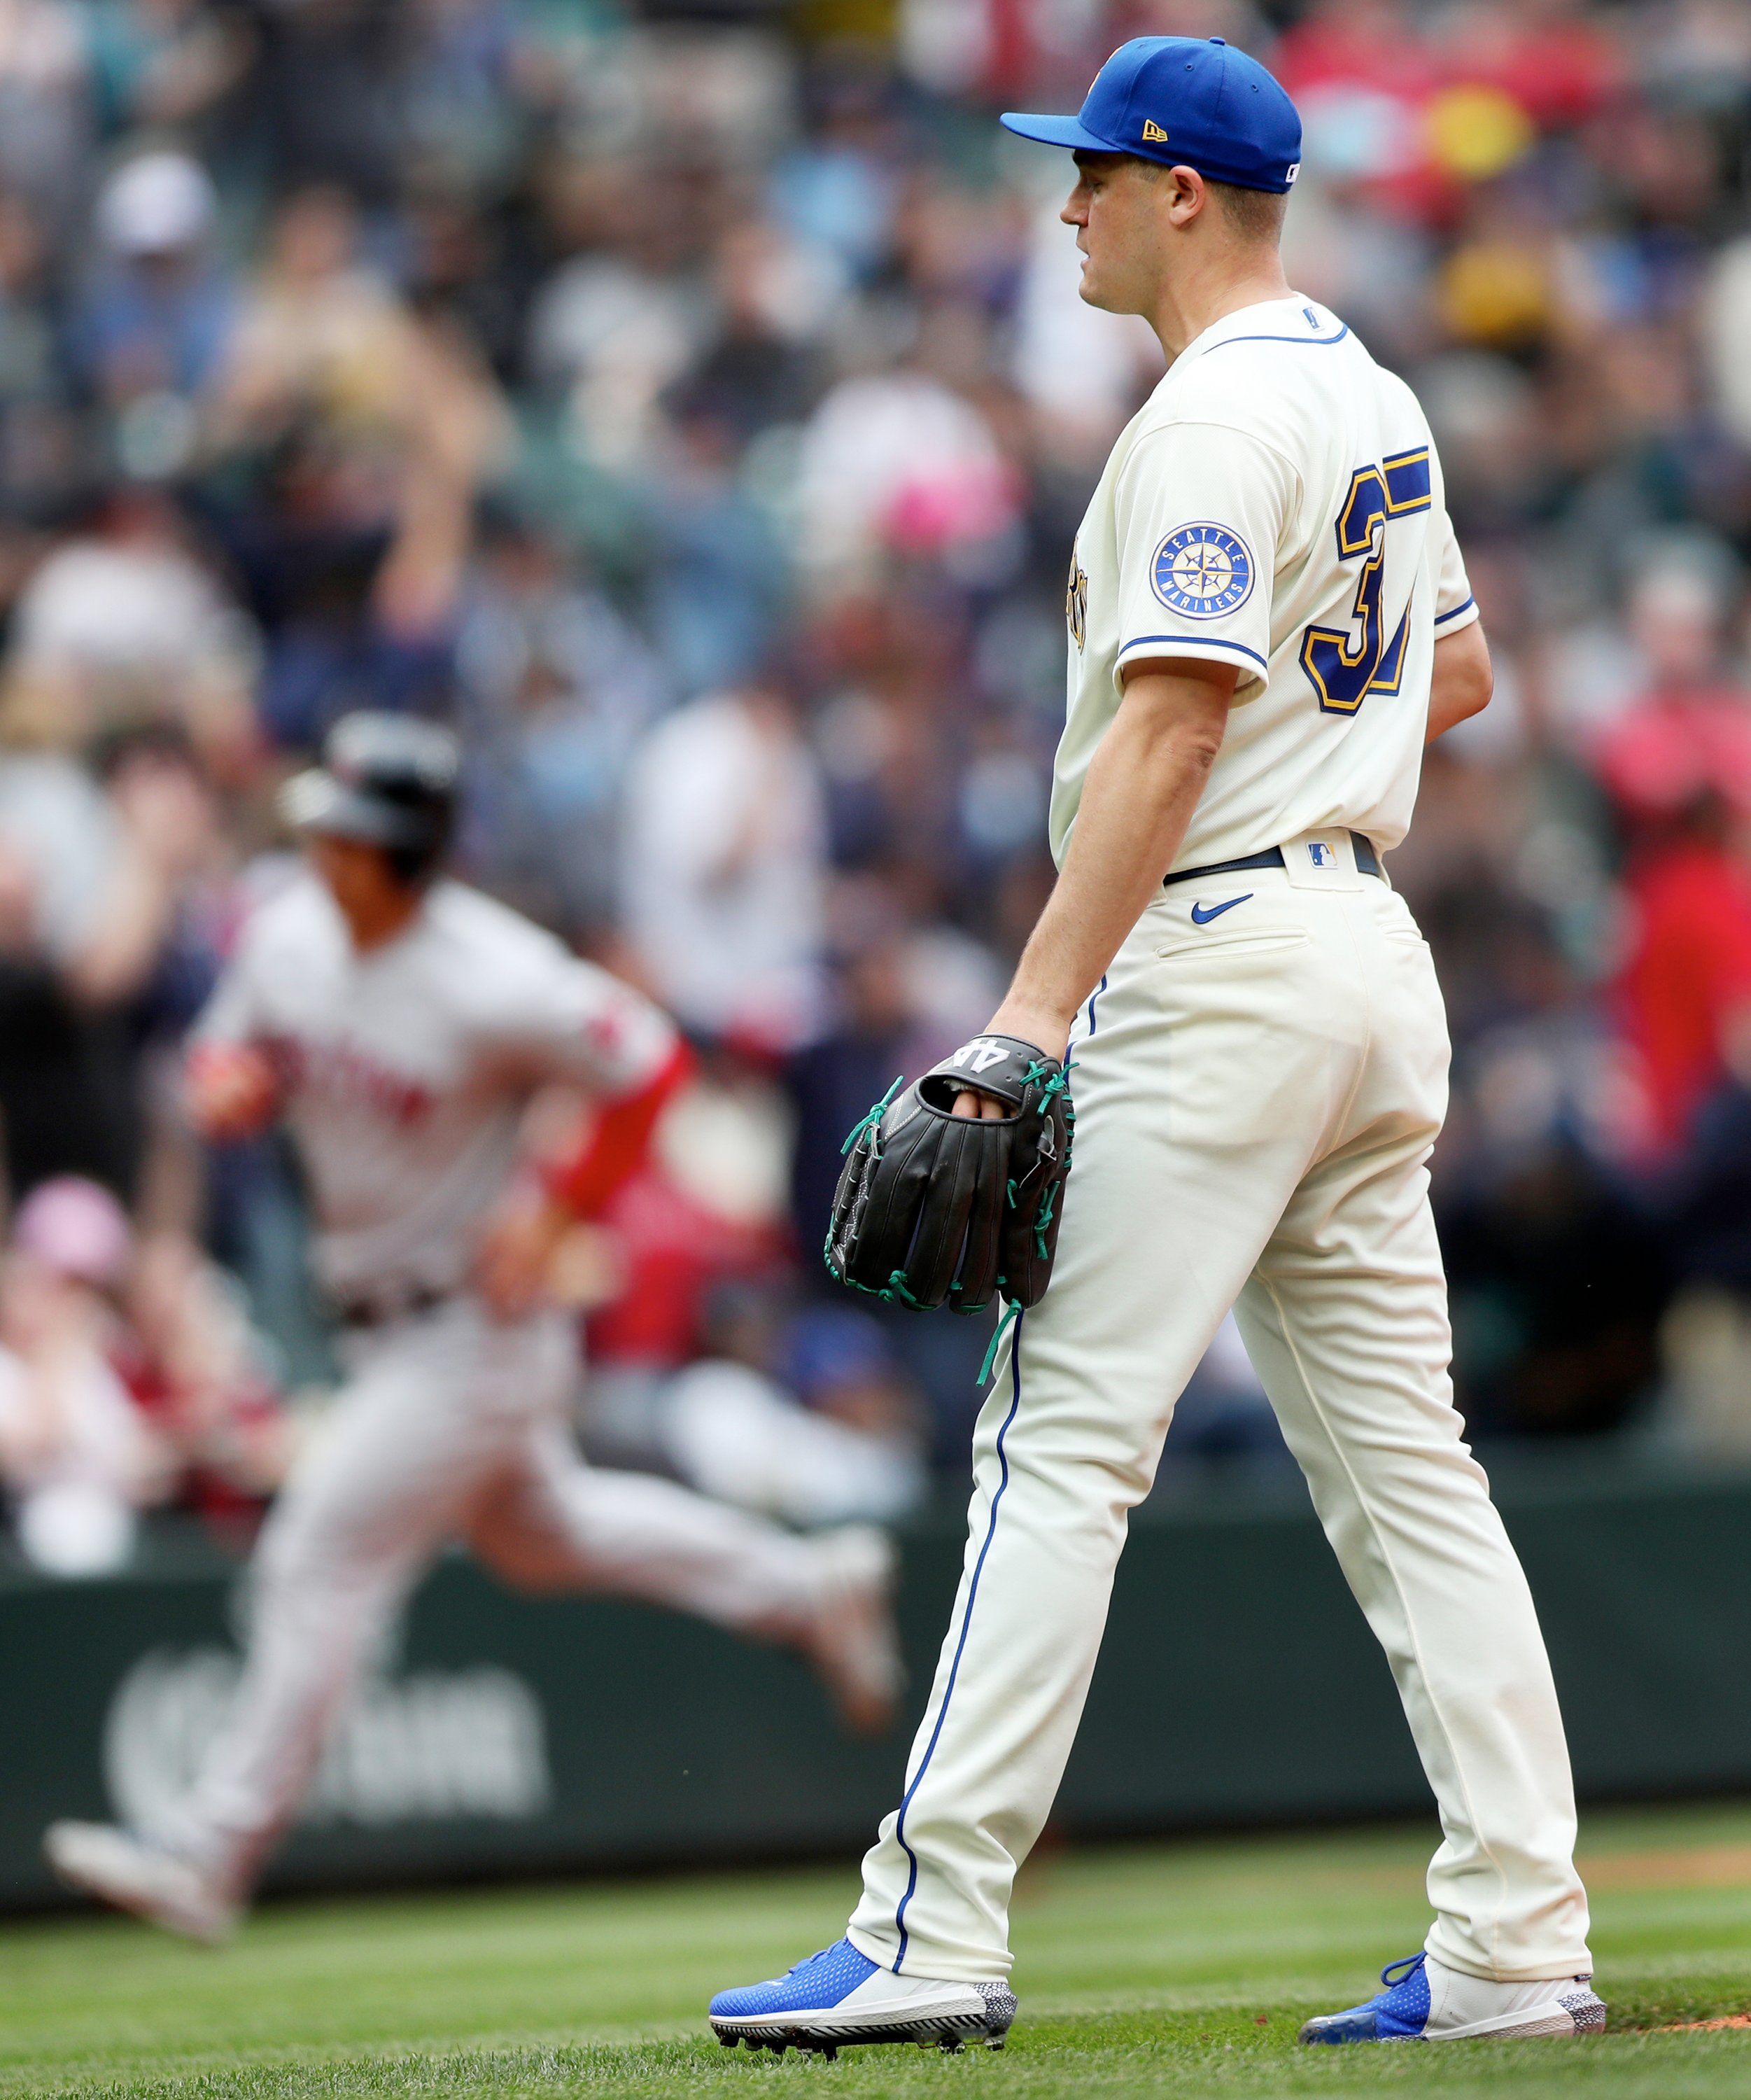 Cal Raleigh says it's time for the Mariners to spend. Who should